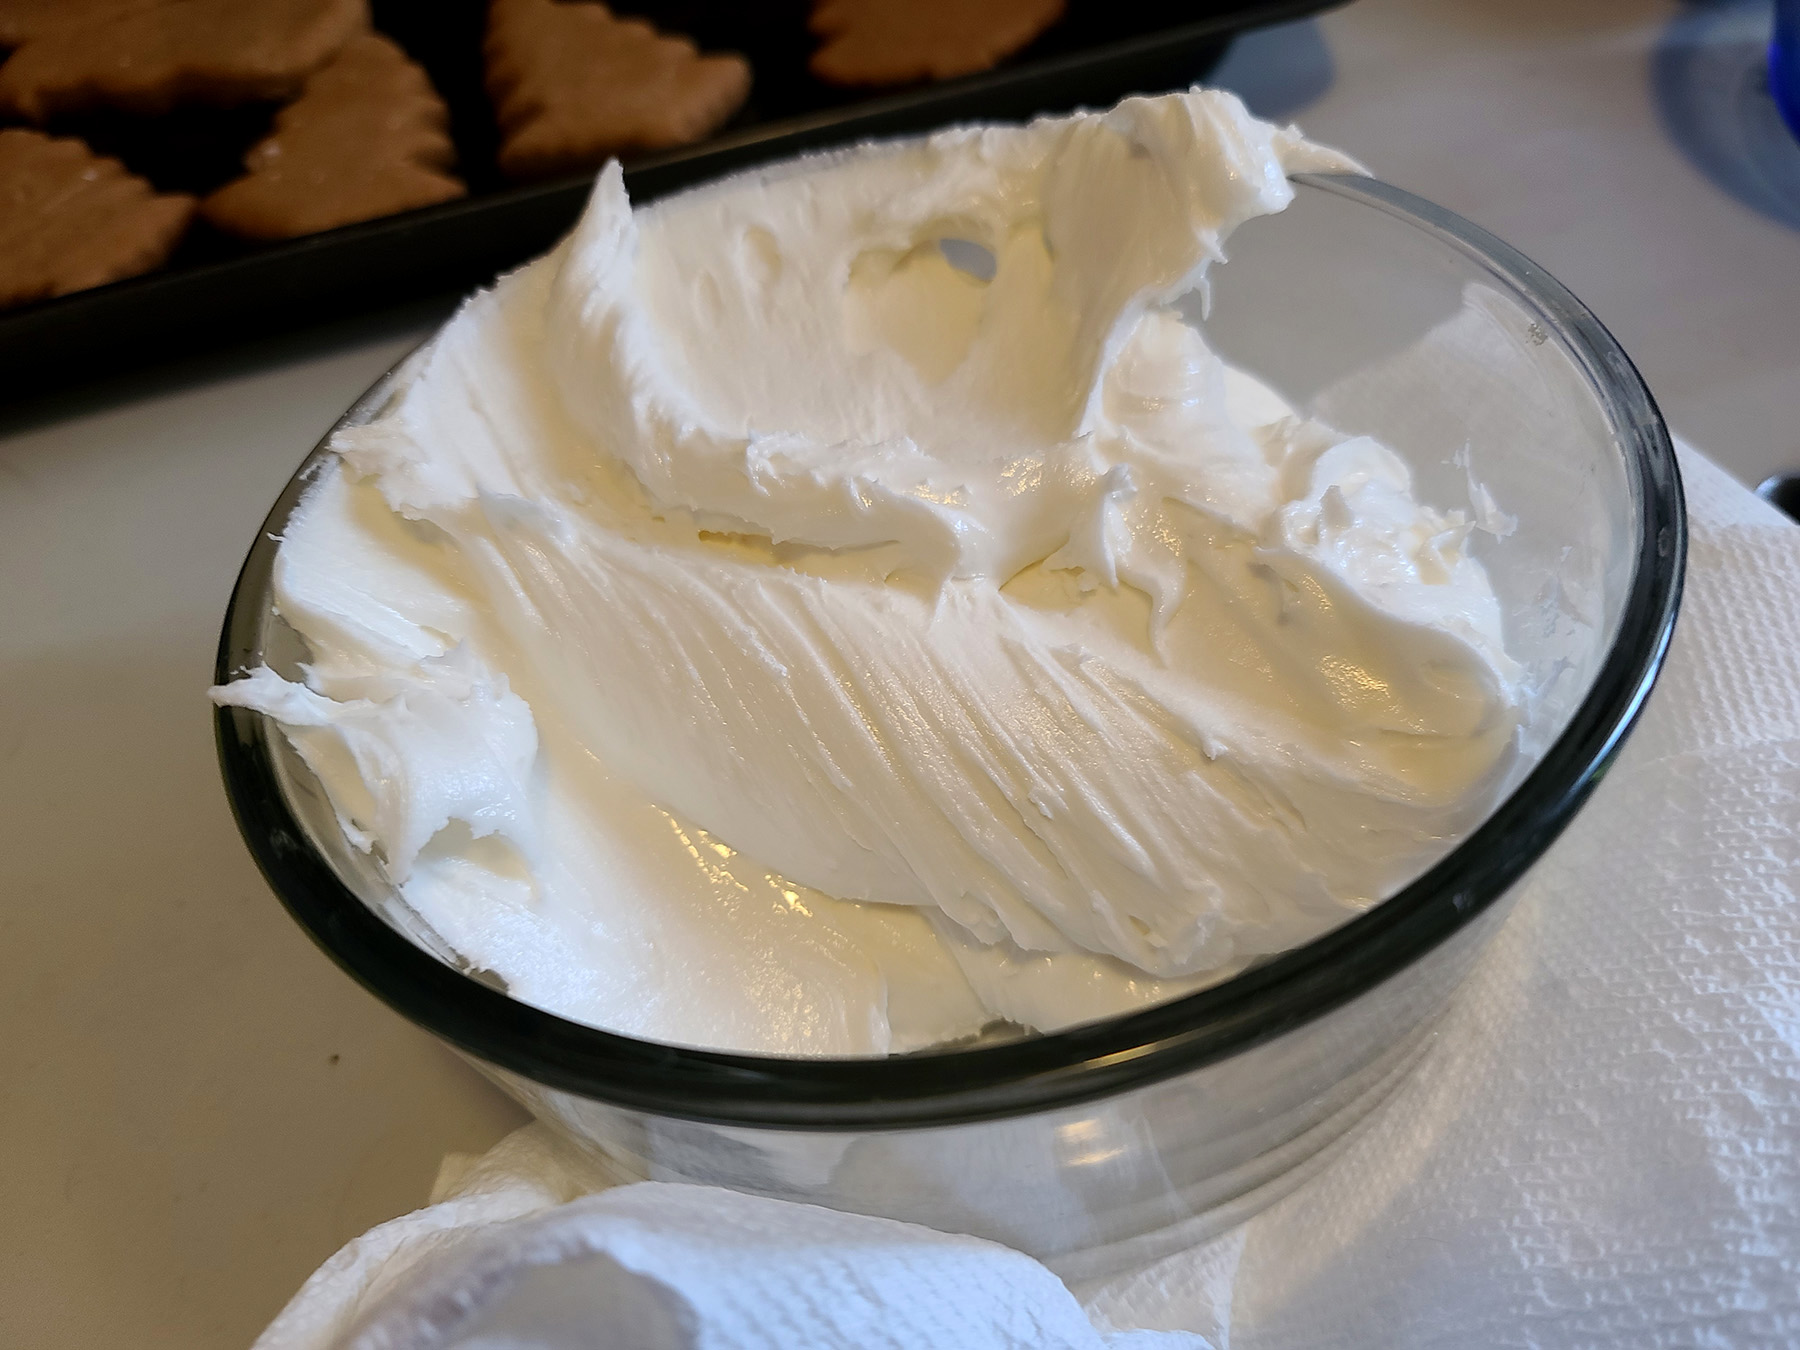 A close up view of a bowl of royal icing.